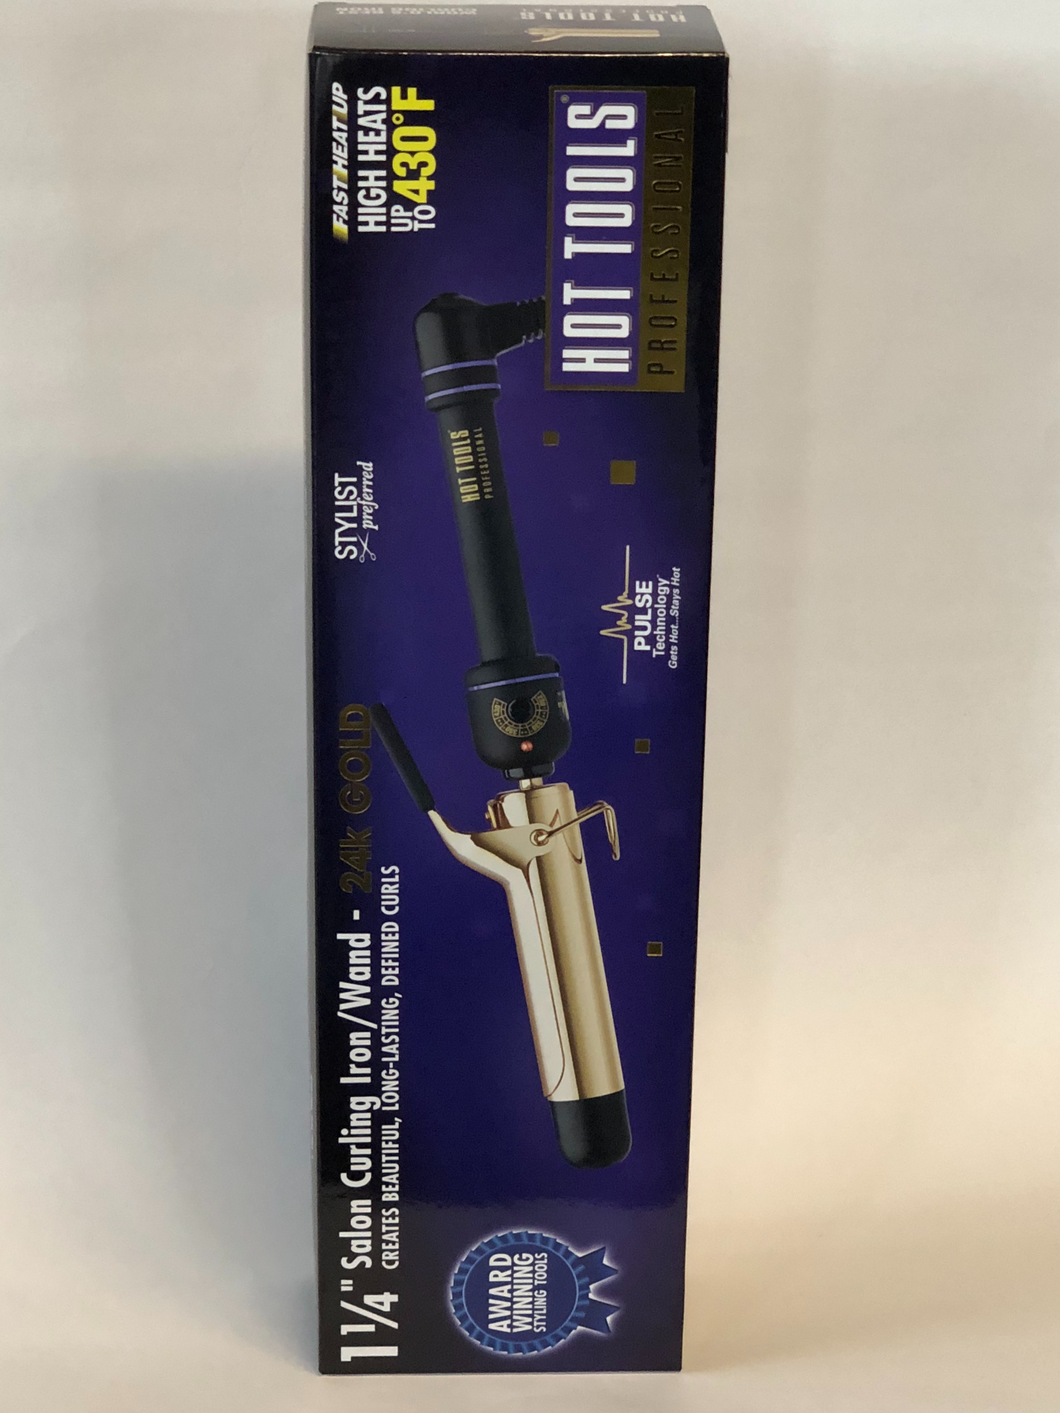 Hot Tools Curling Iron -  one and one quarter inch (1 1/4